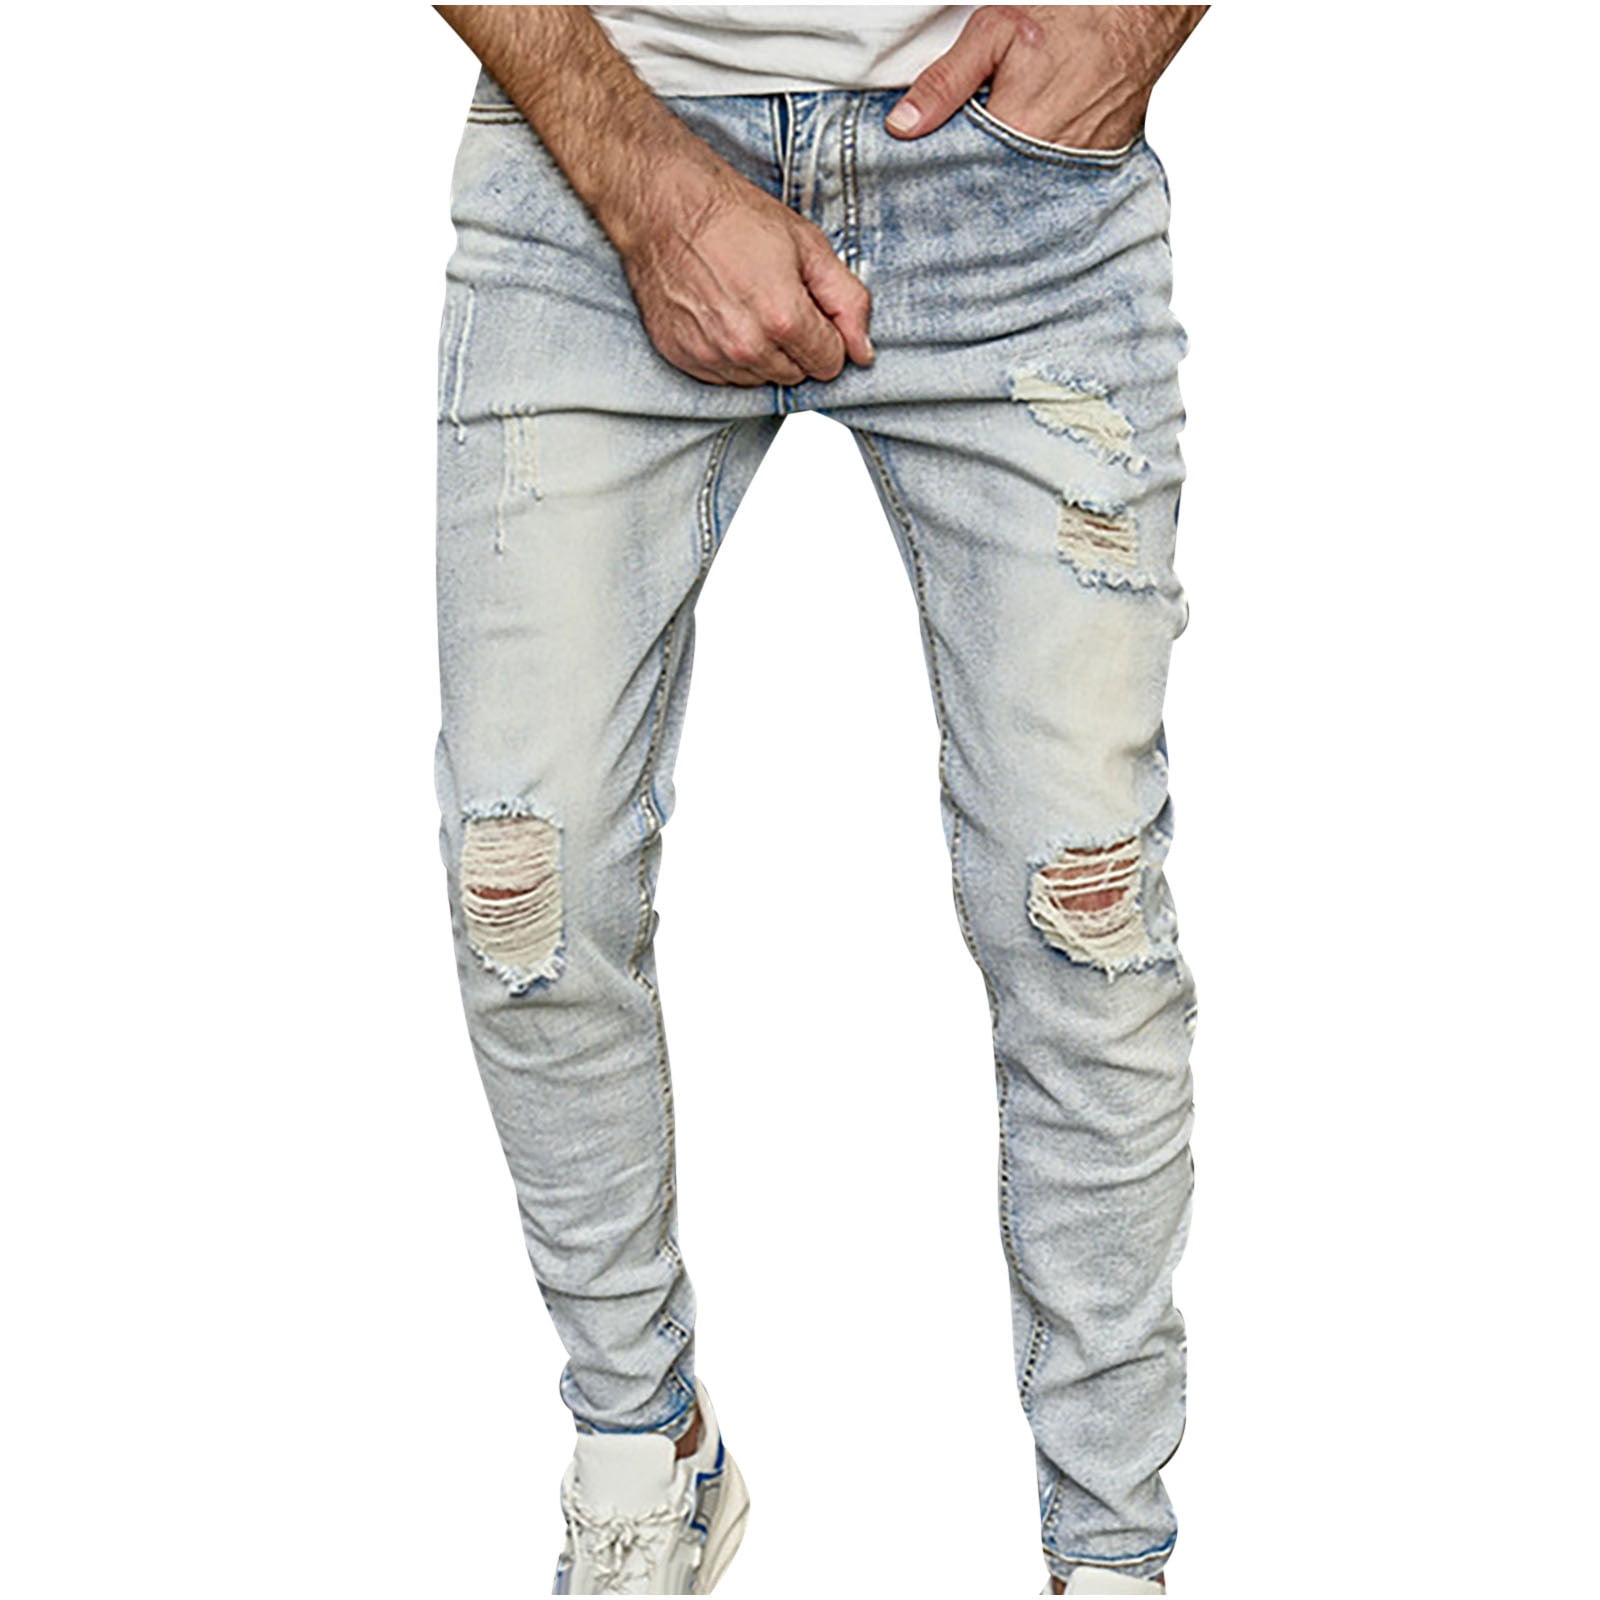 Brglopf Men's Slim Fit Jeans Stretch Destroyed Ripped Skinny Jeans Straight  Leg Zip Up Denim Pants with Pockets